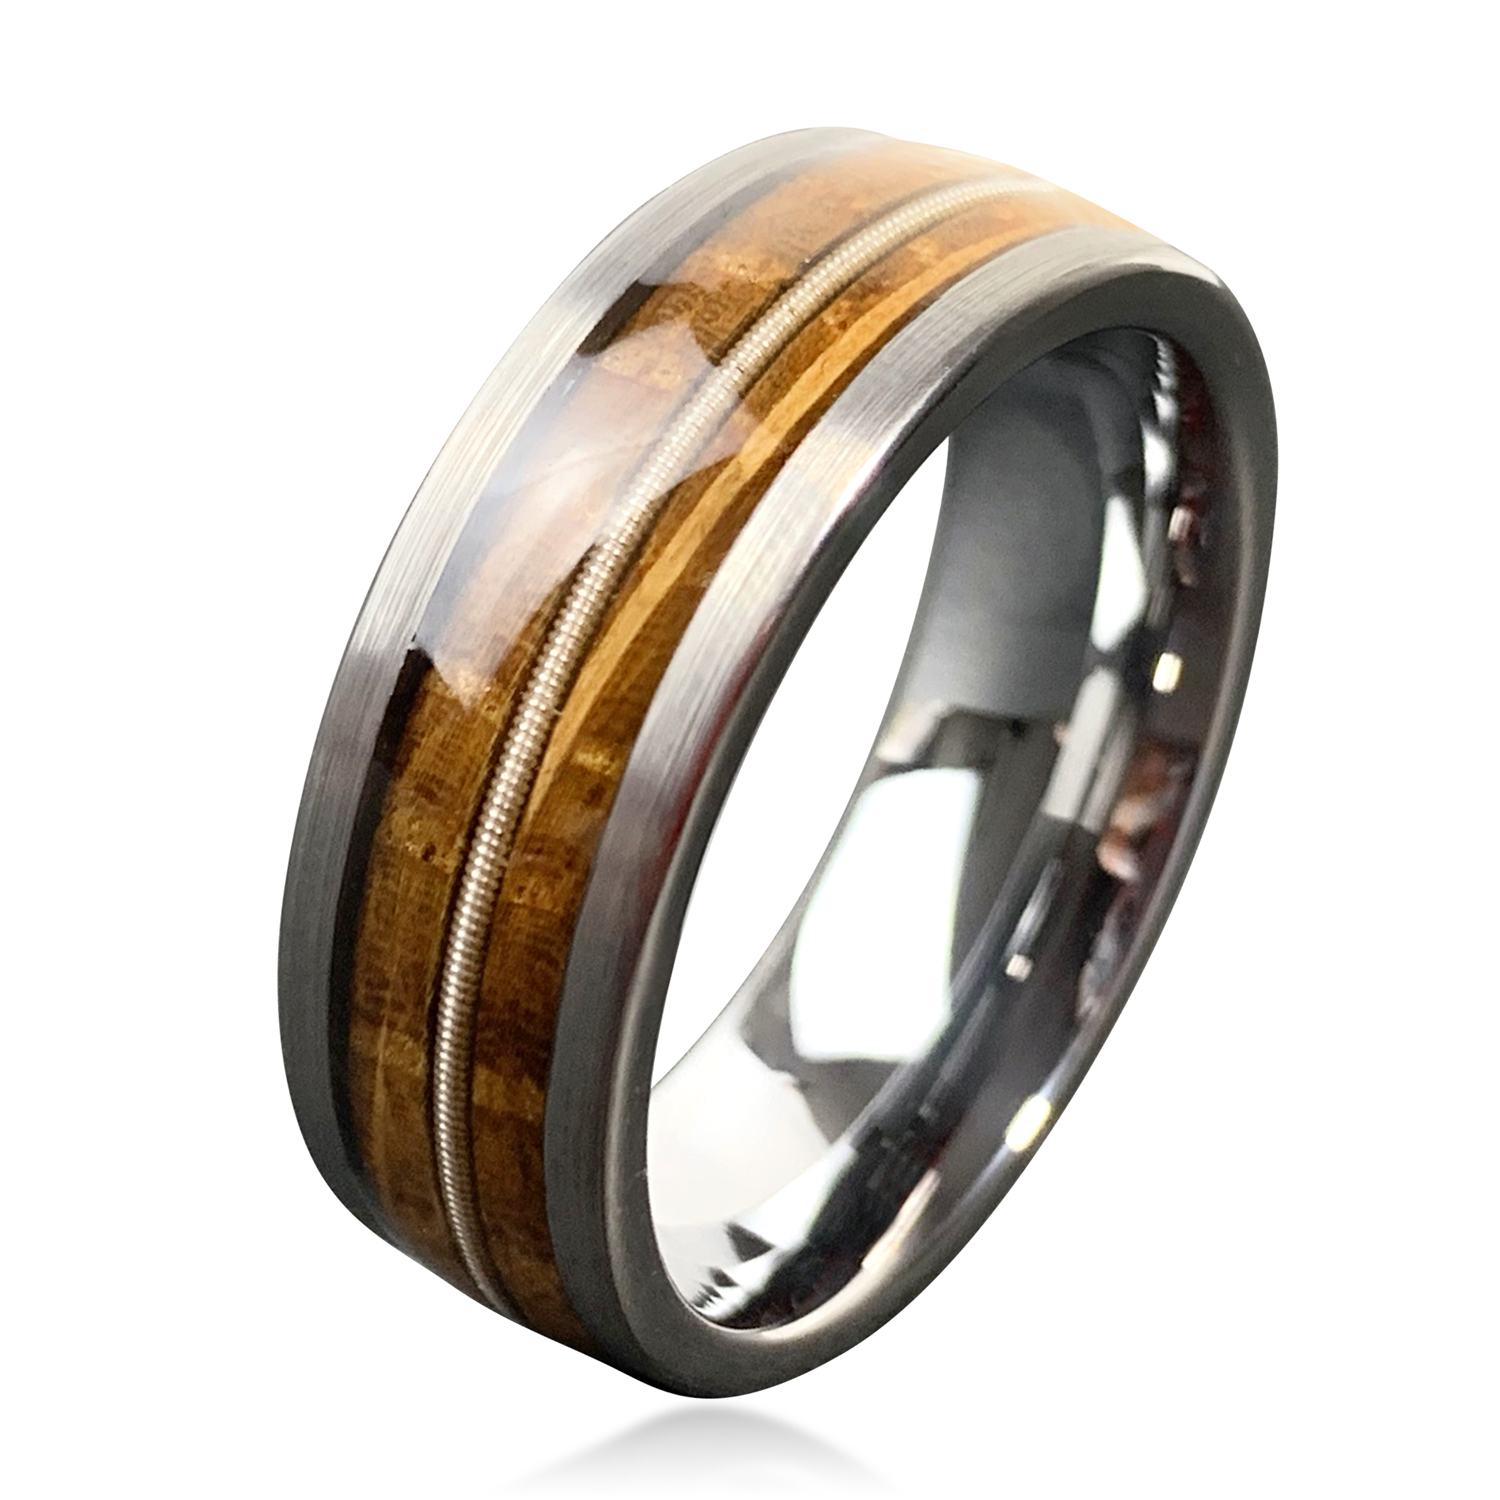 8mm Brushed Domed Hammered Silver Black Coffee Rose Gold Tungsten Guitar String Ring With Whiskey Barrel Koa Wood Inlay Featured Image